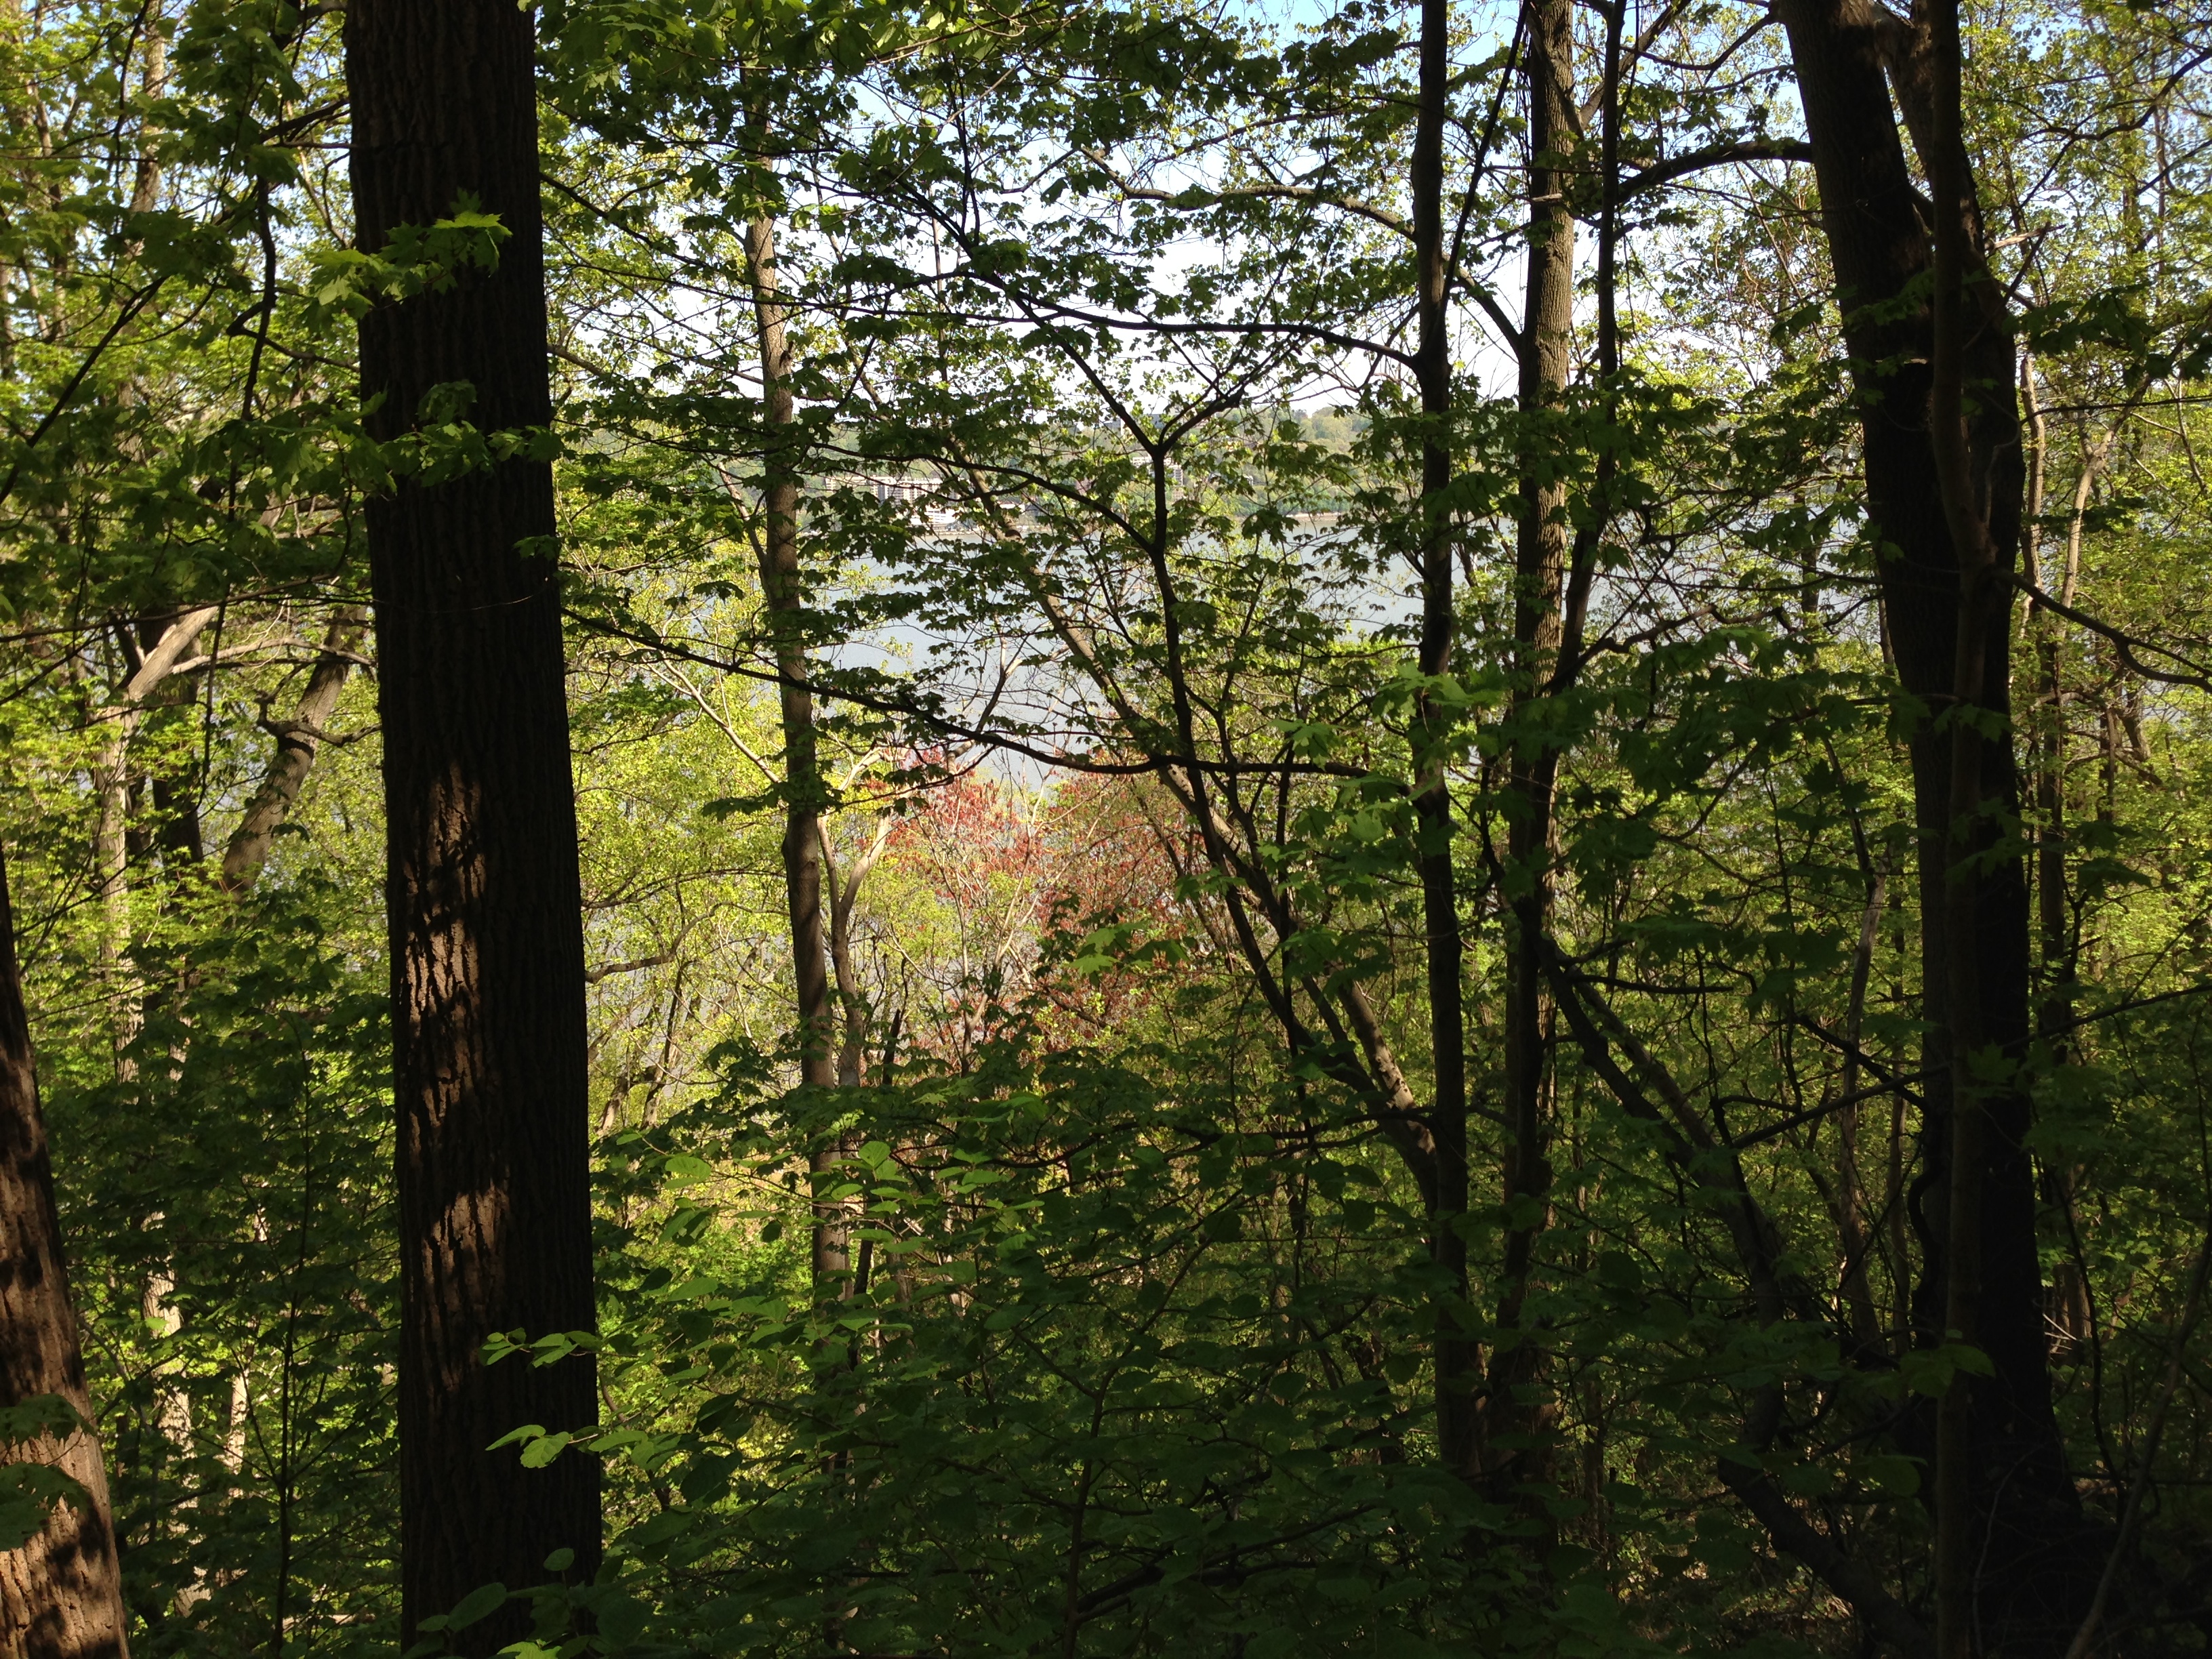 File:2013-05-05 15 02 17 View through the forest towards the Hudson ...